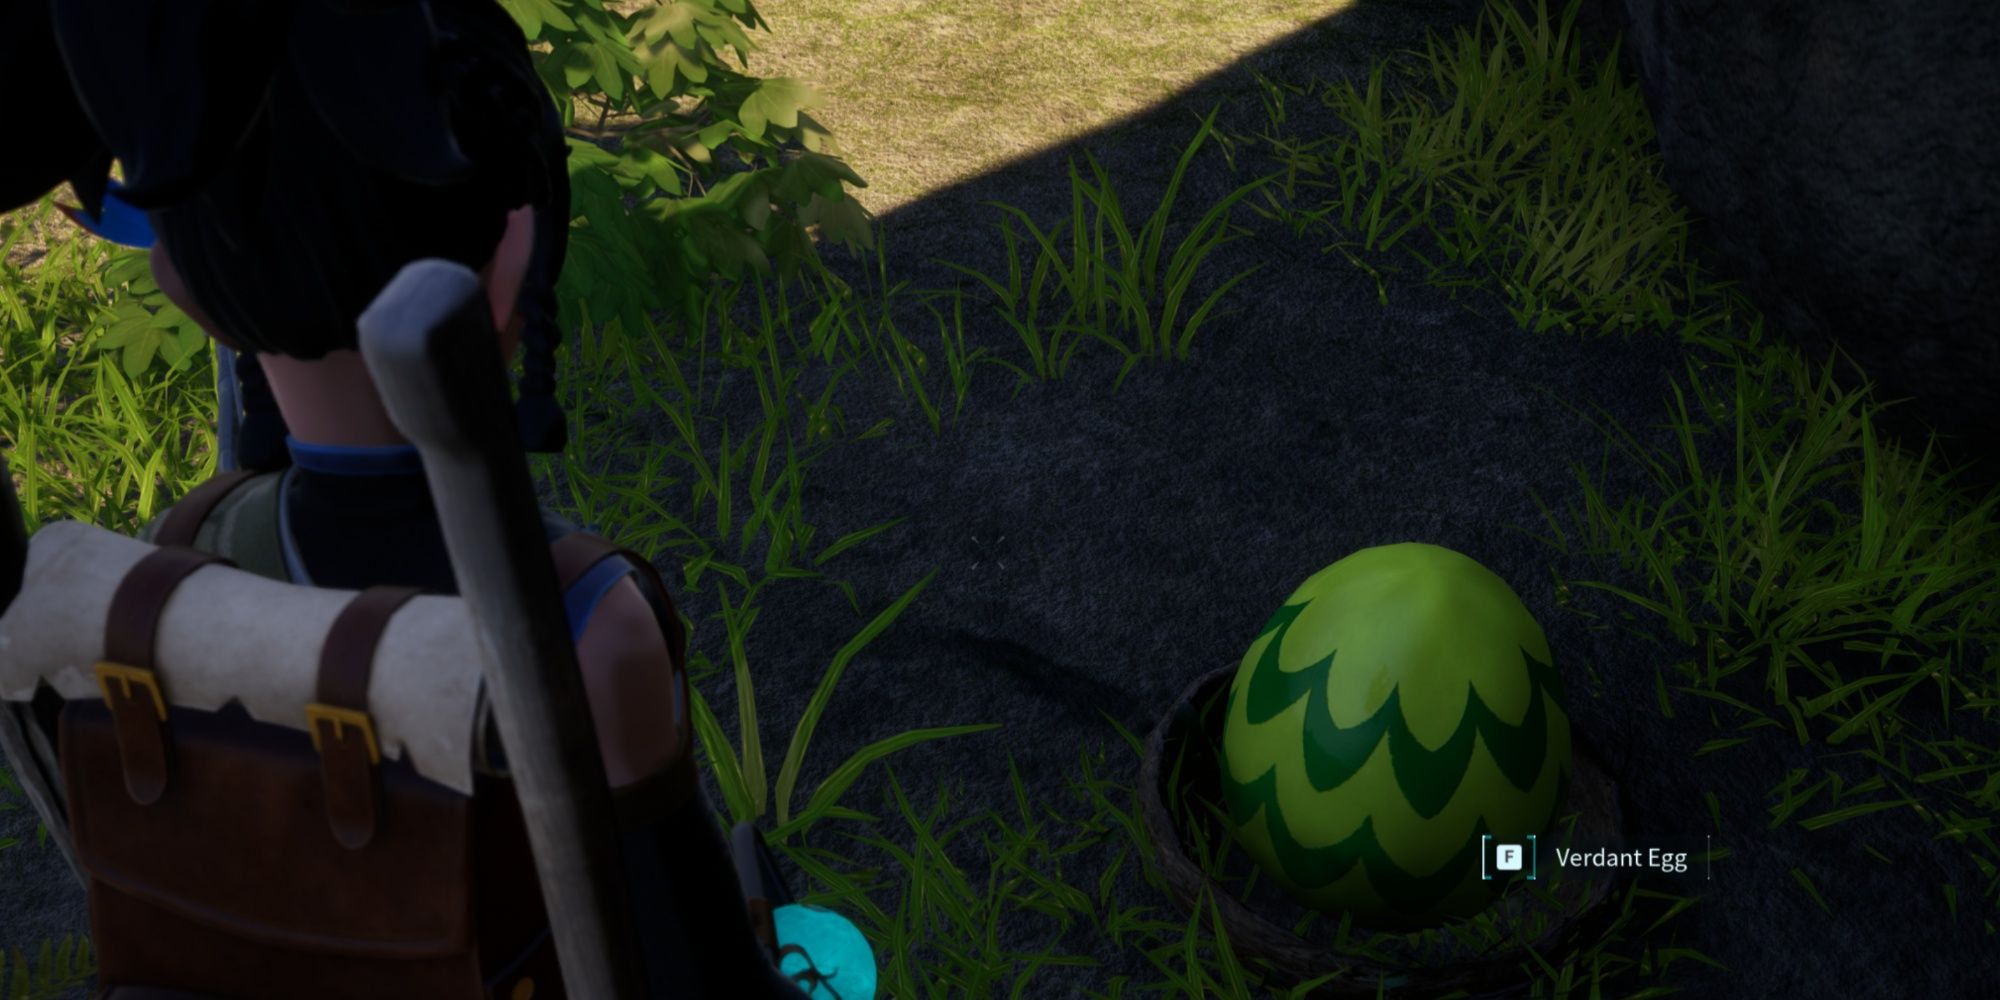 Palworld: The player looks down at a Verdant Egg